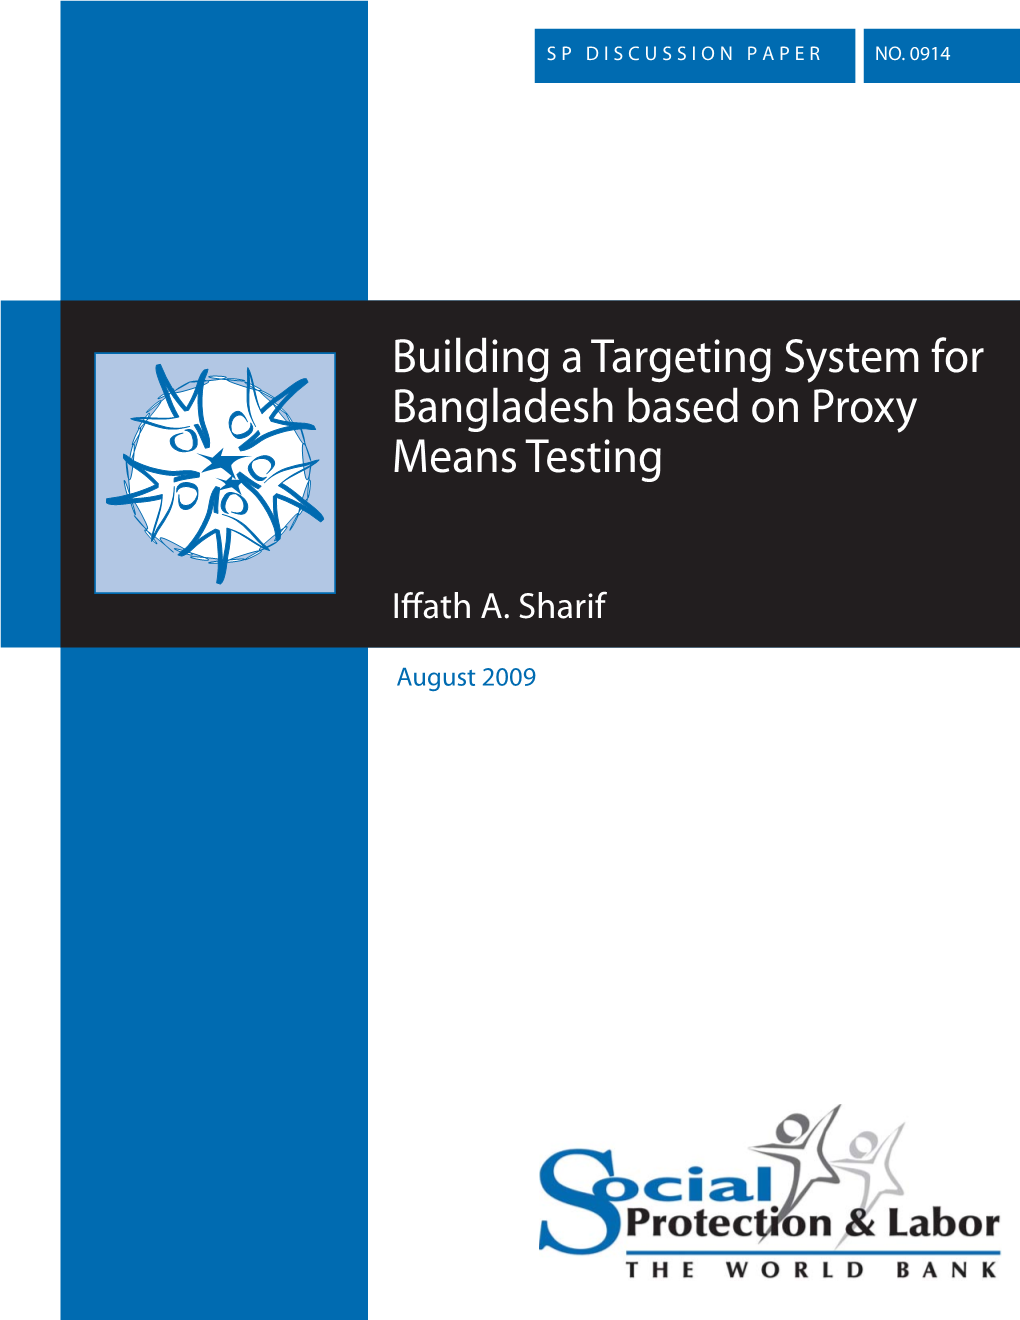 Building a Targeting System for Bangladesh Based on Proxy Means Testing